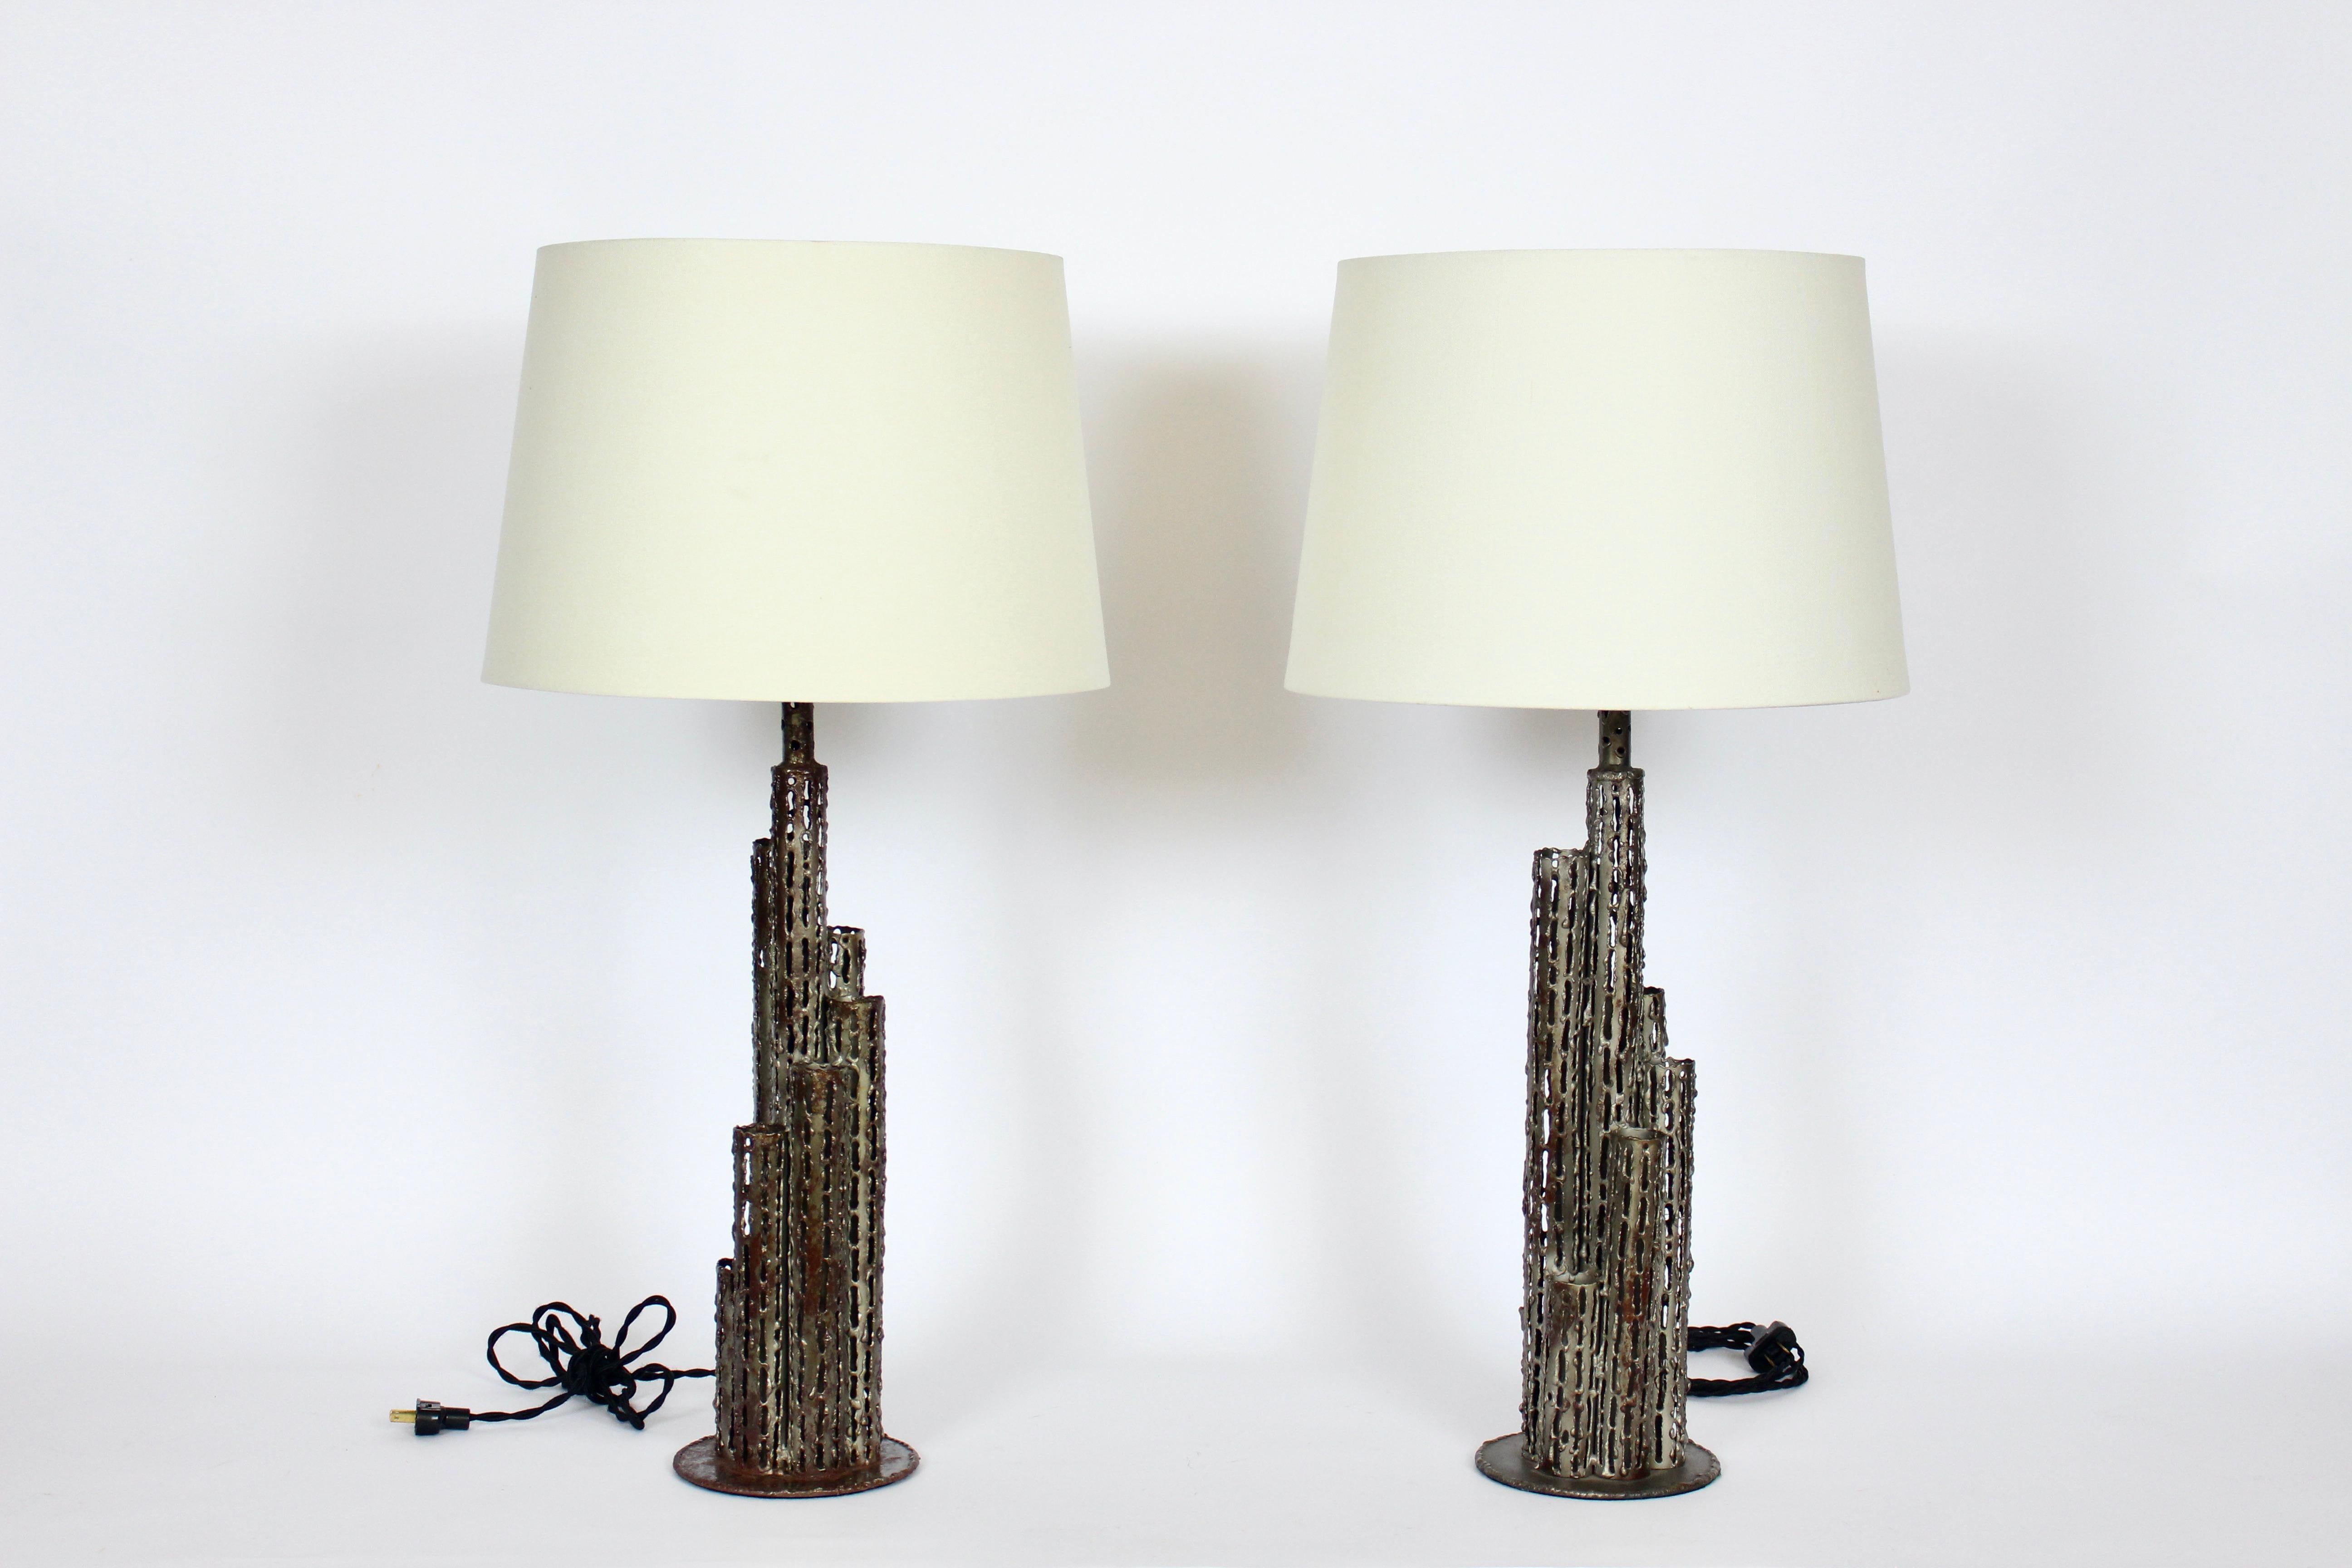 Tall pair of Marcello Fantoni handcrafted Torch Cut Steel Table Lamps, 1950's. Featuring open pierced, welded and sealed cylindrical pipe type forms with Nickel, Silver coloration and Verdigris touches throughout. Small footprint. Shades shown for